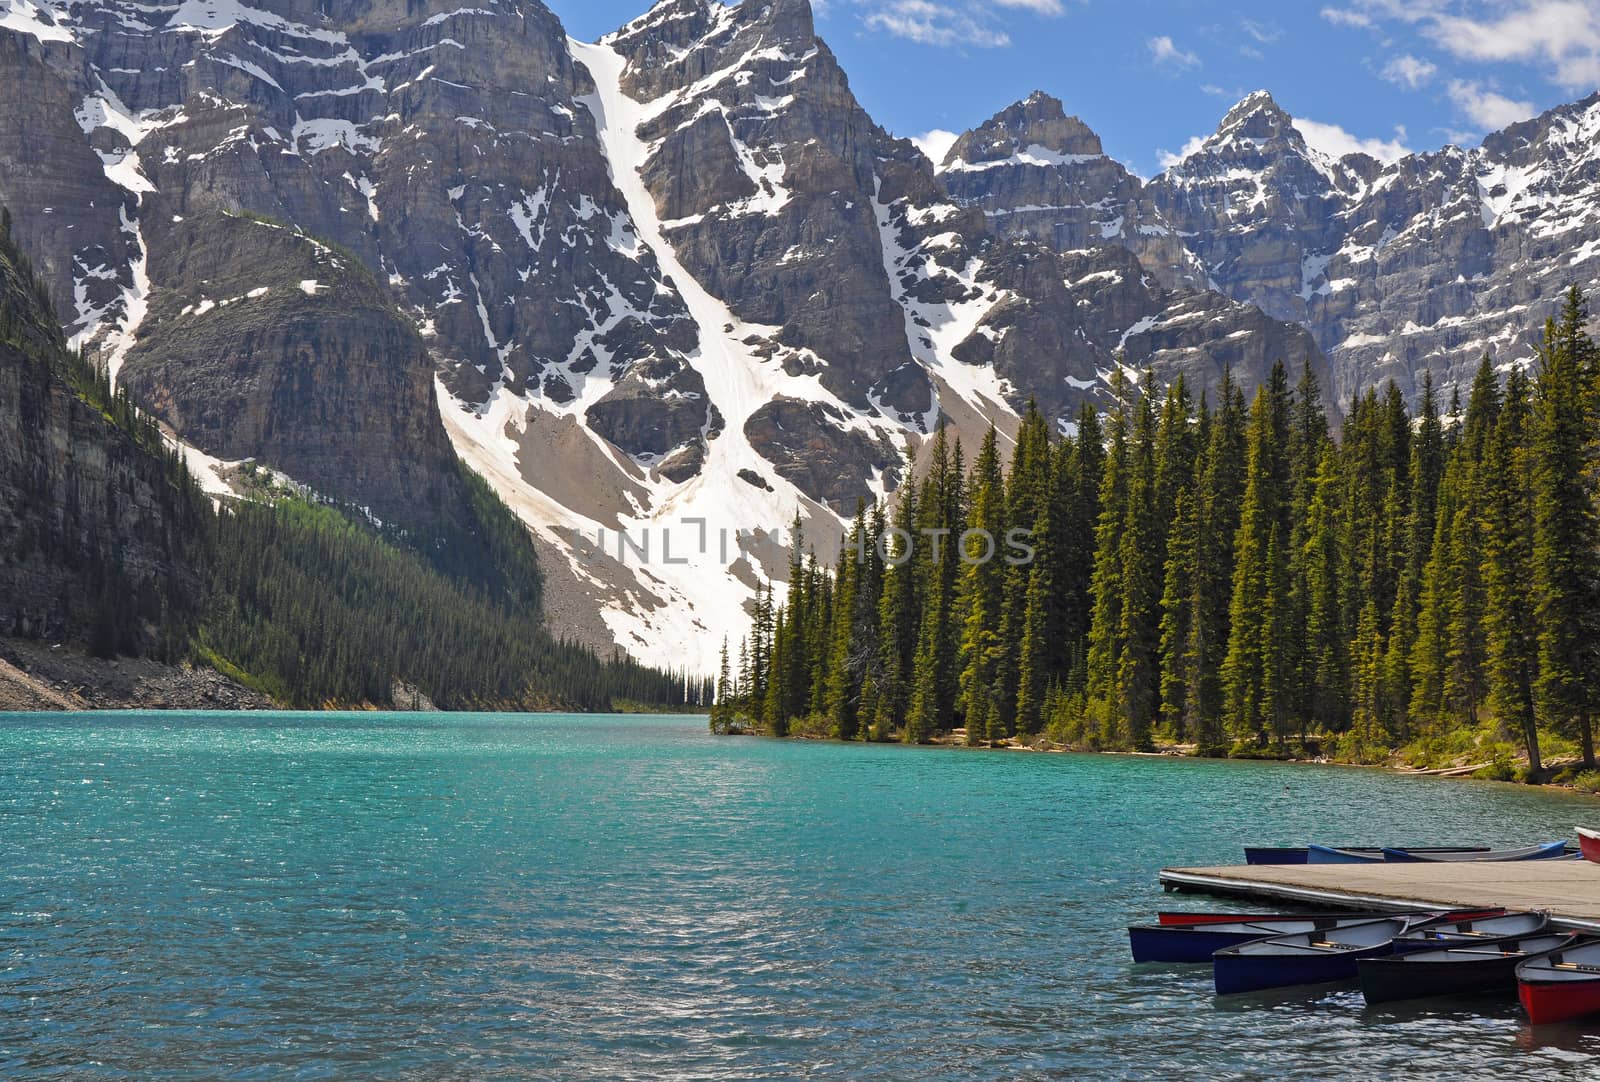 Summer at Moraine Lake in Banff National Park by ingperl